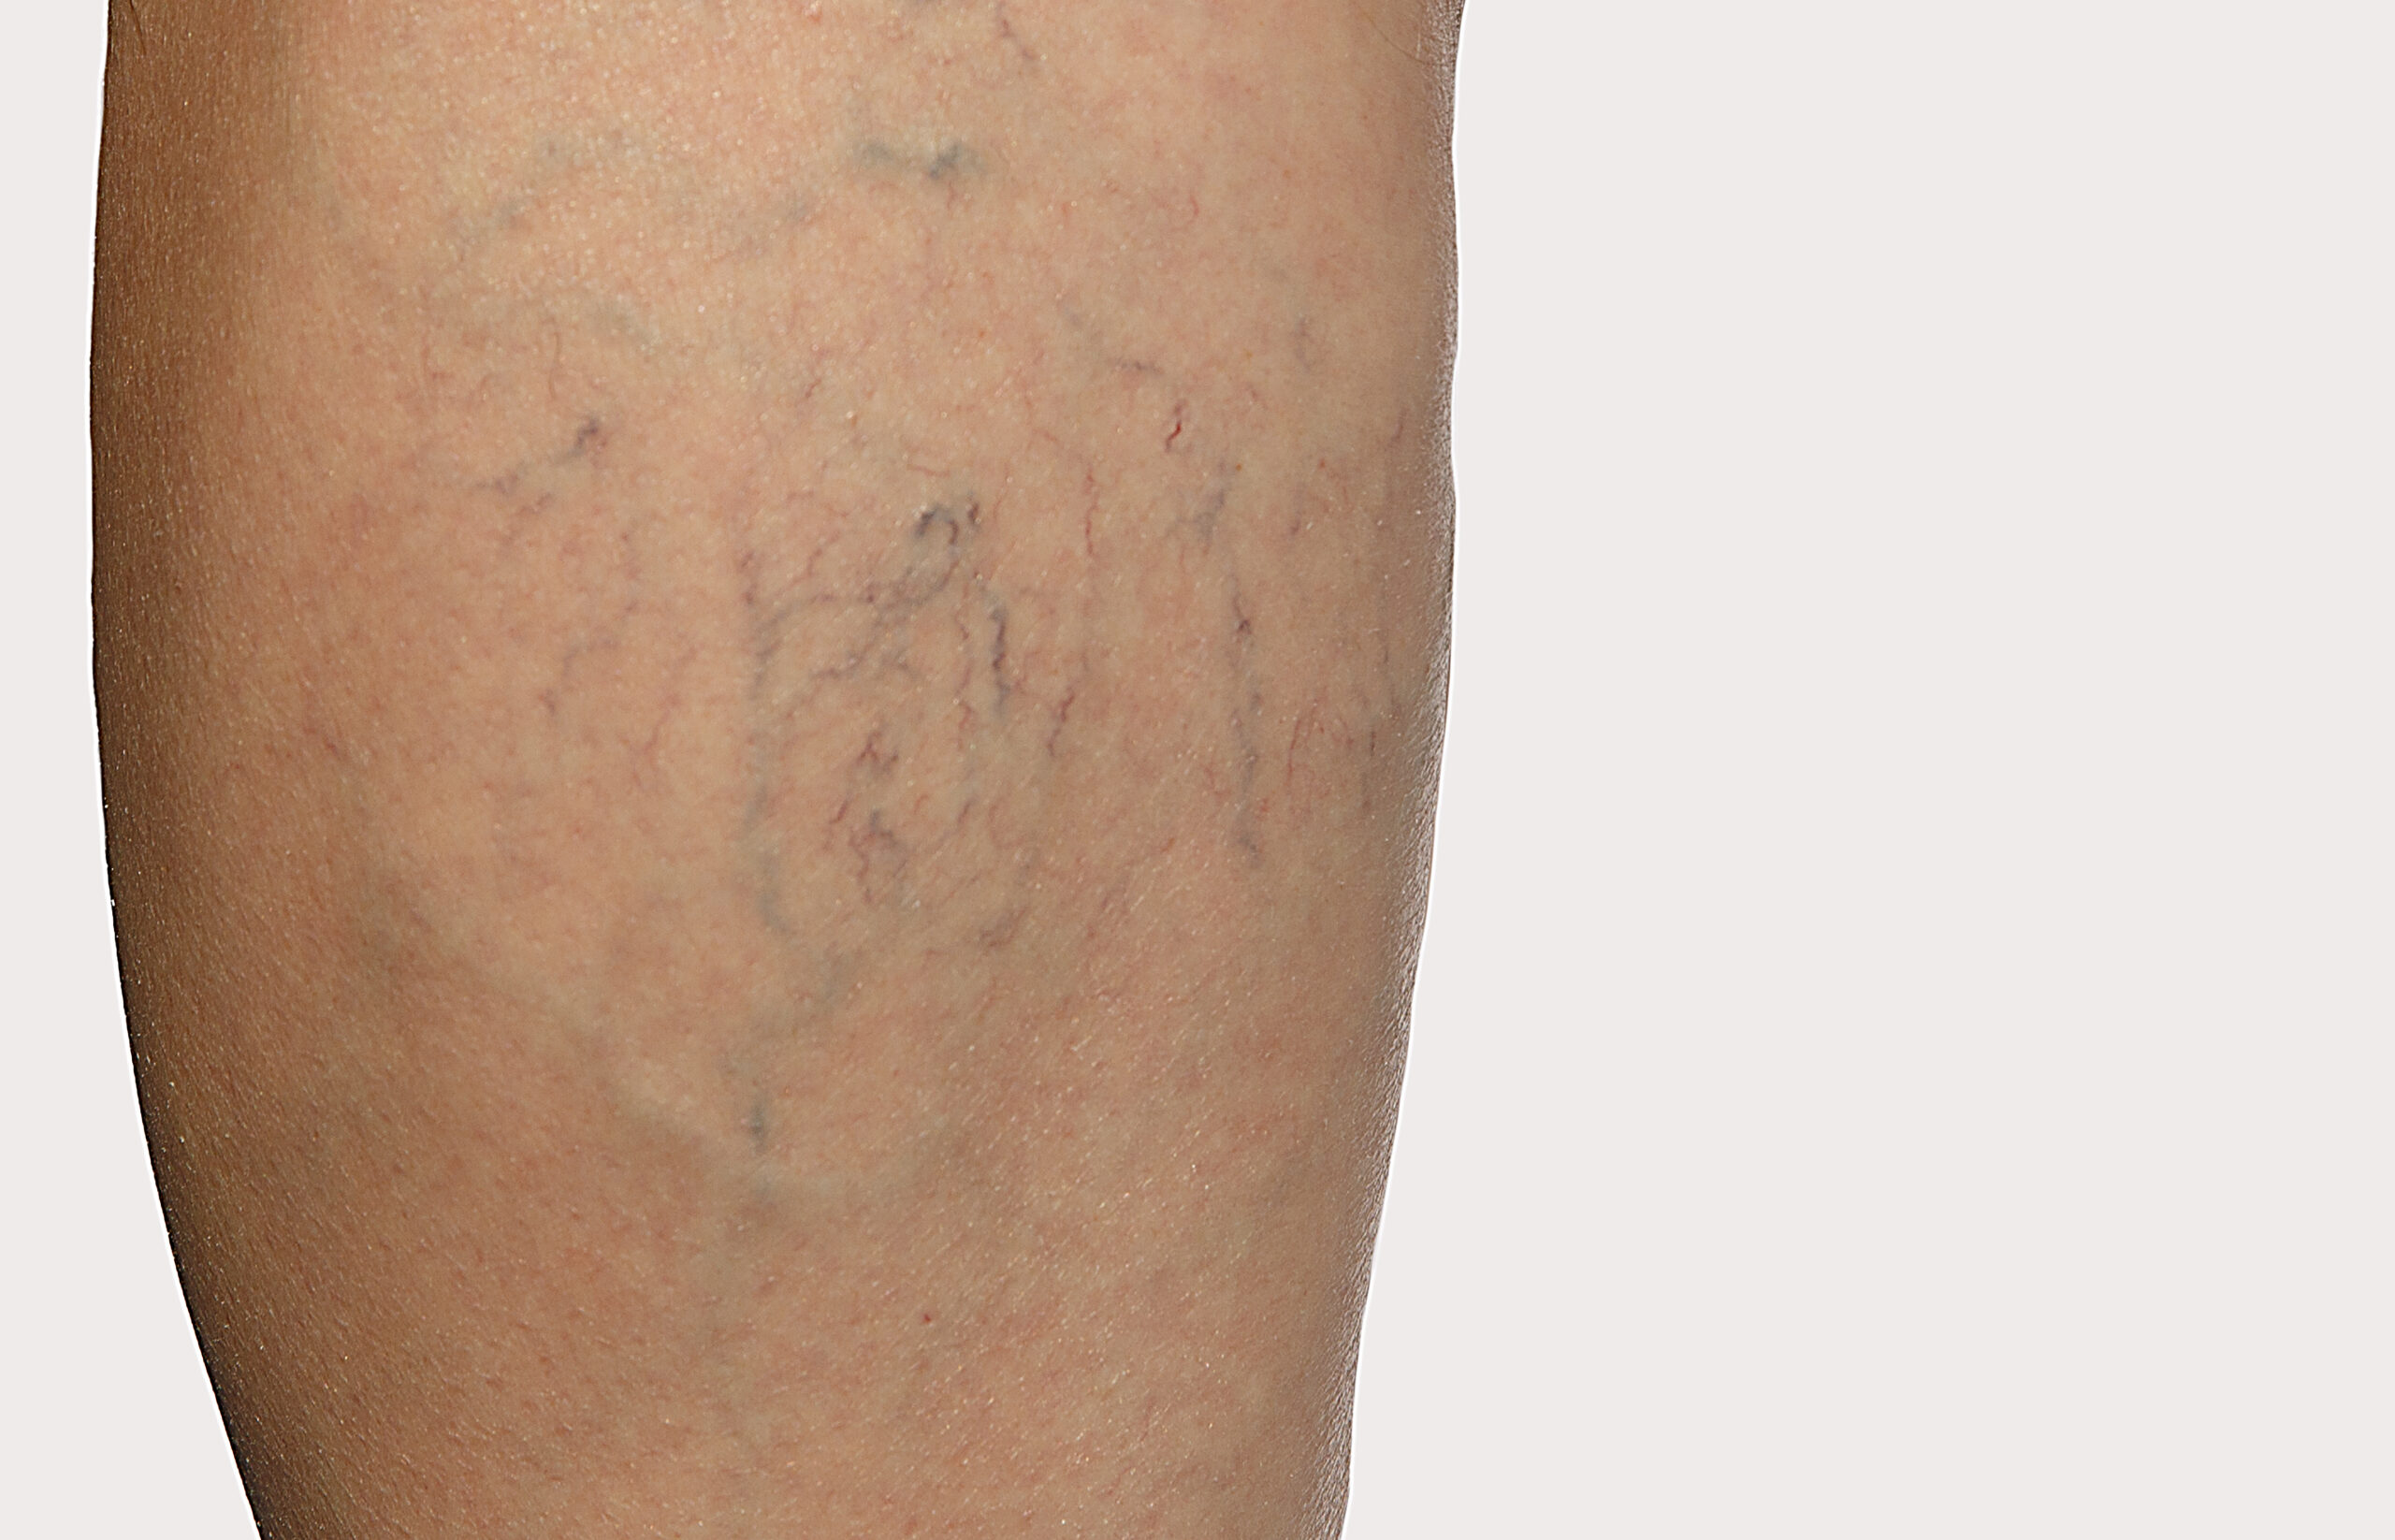 Difference Between Spider Veins and Varicose Veins